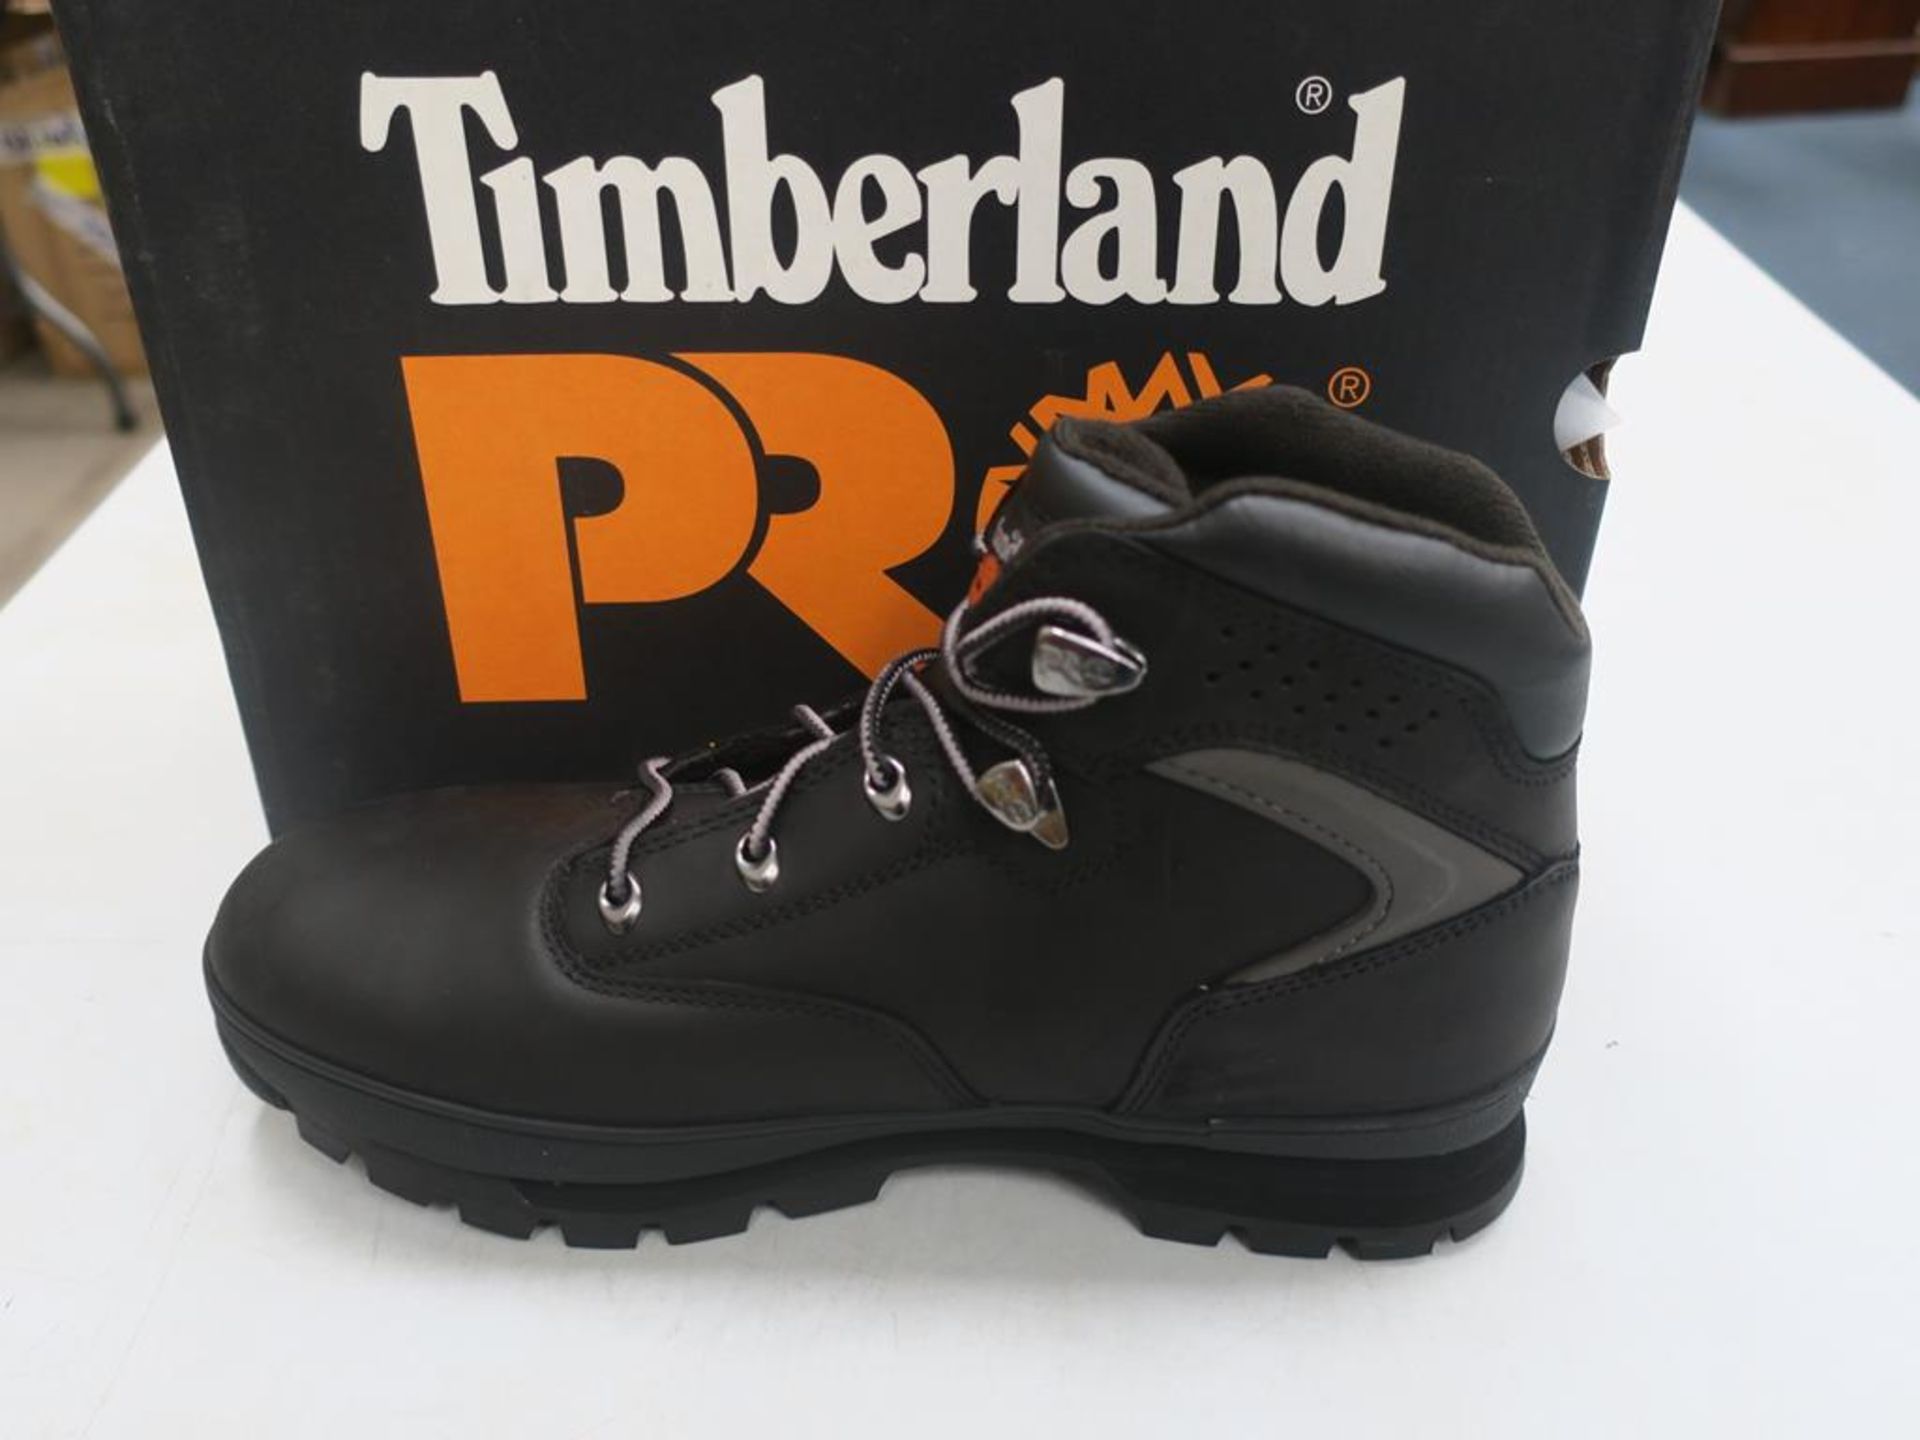 * A pair of New/Boxed Timberland Pro Boots, Euro Hiker 2G Steel Safety Toe in black 'improved fit' - Image 2 of 3